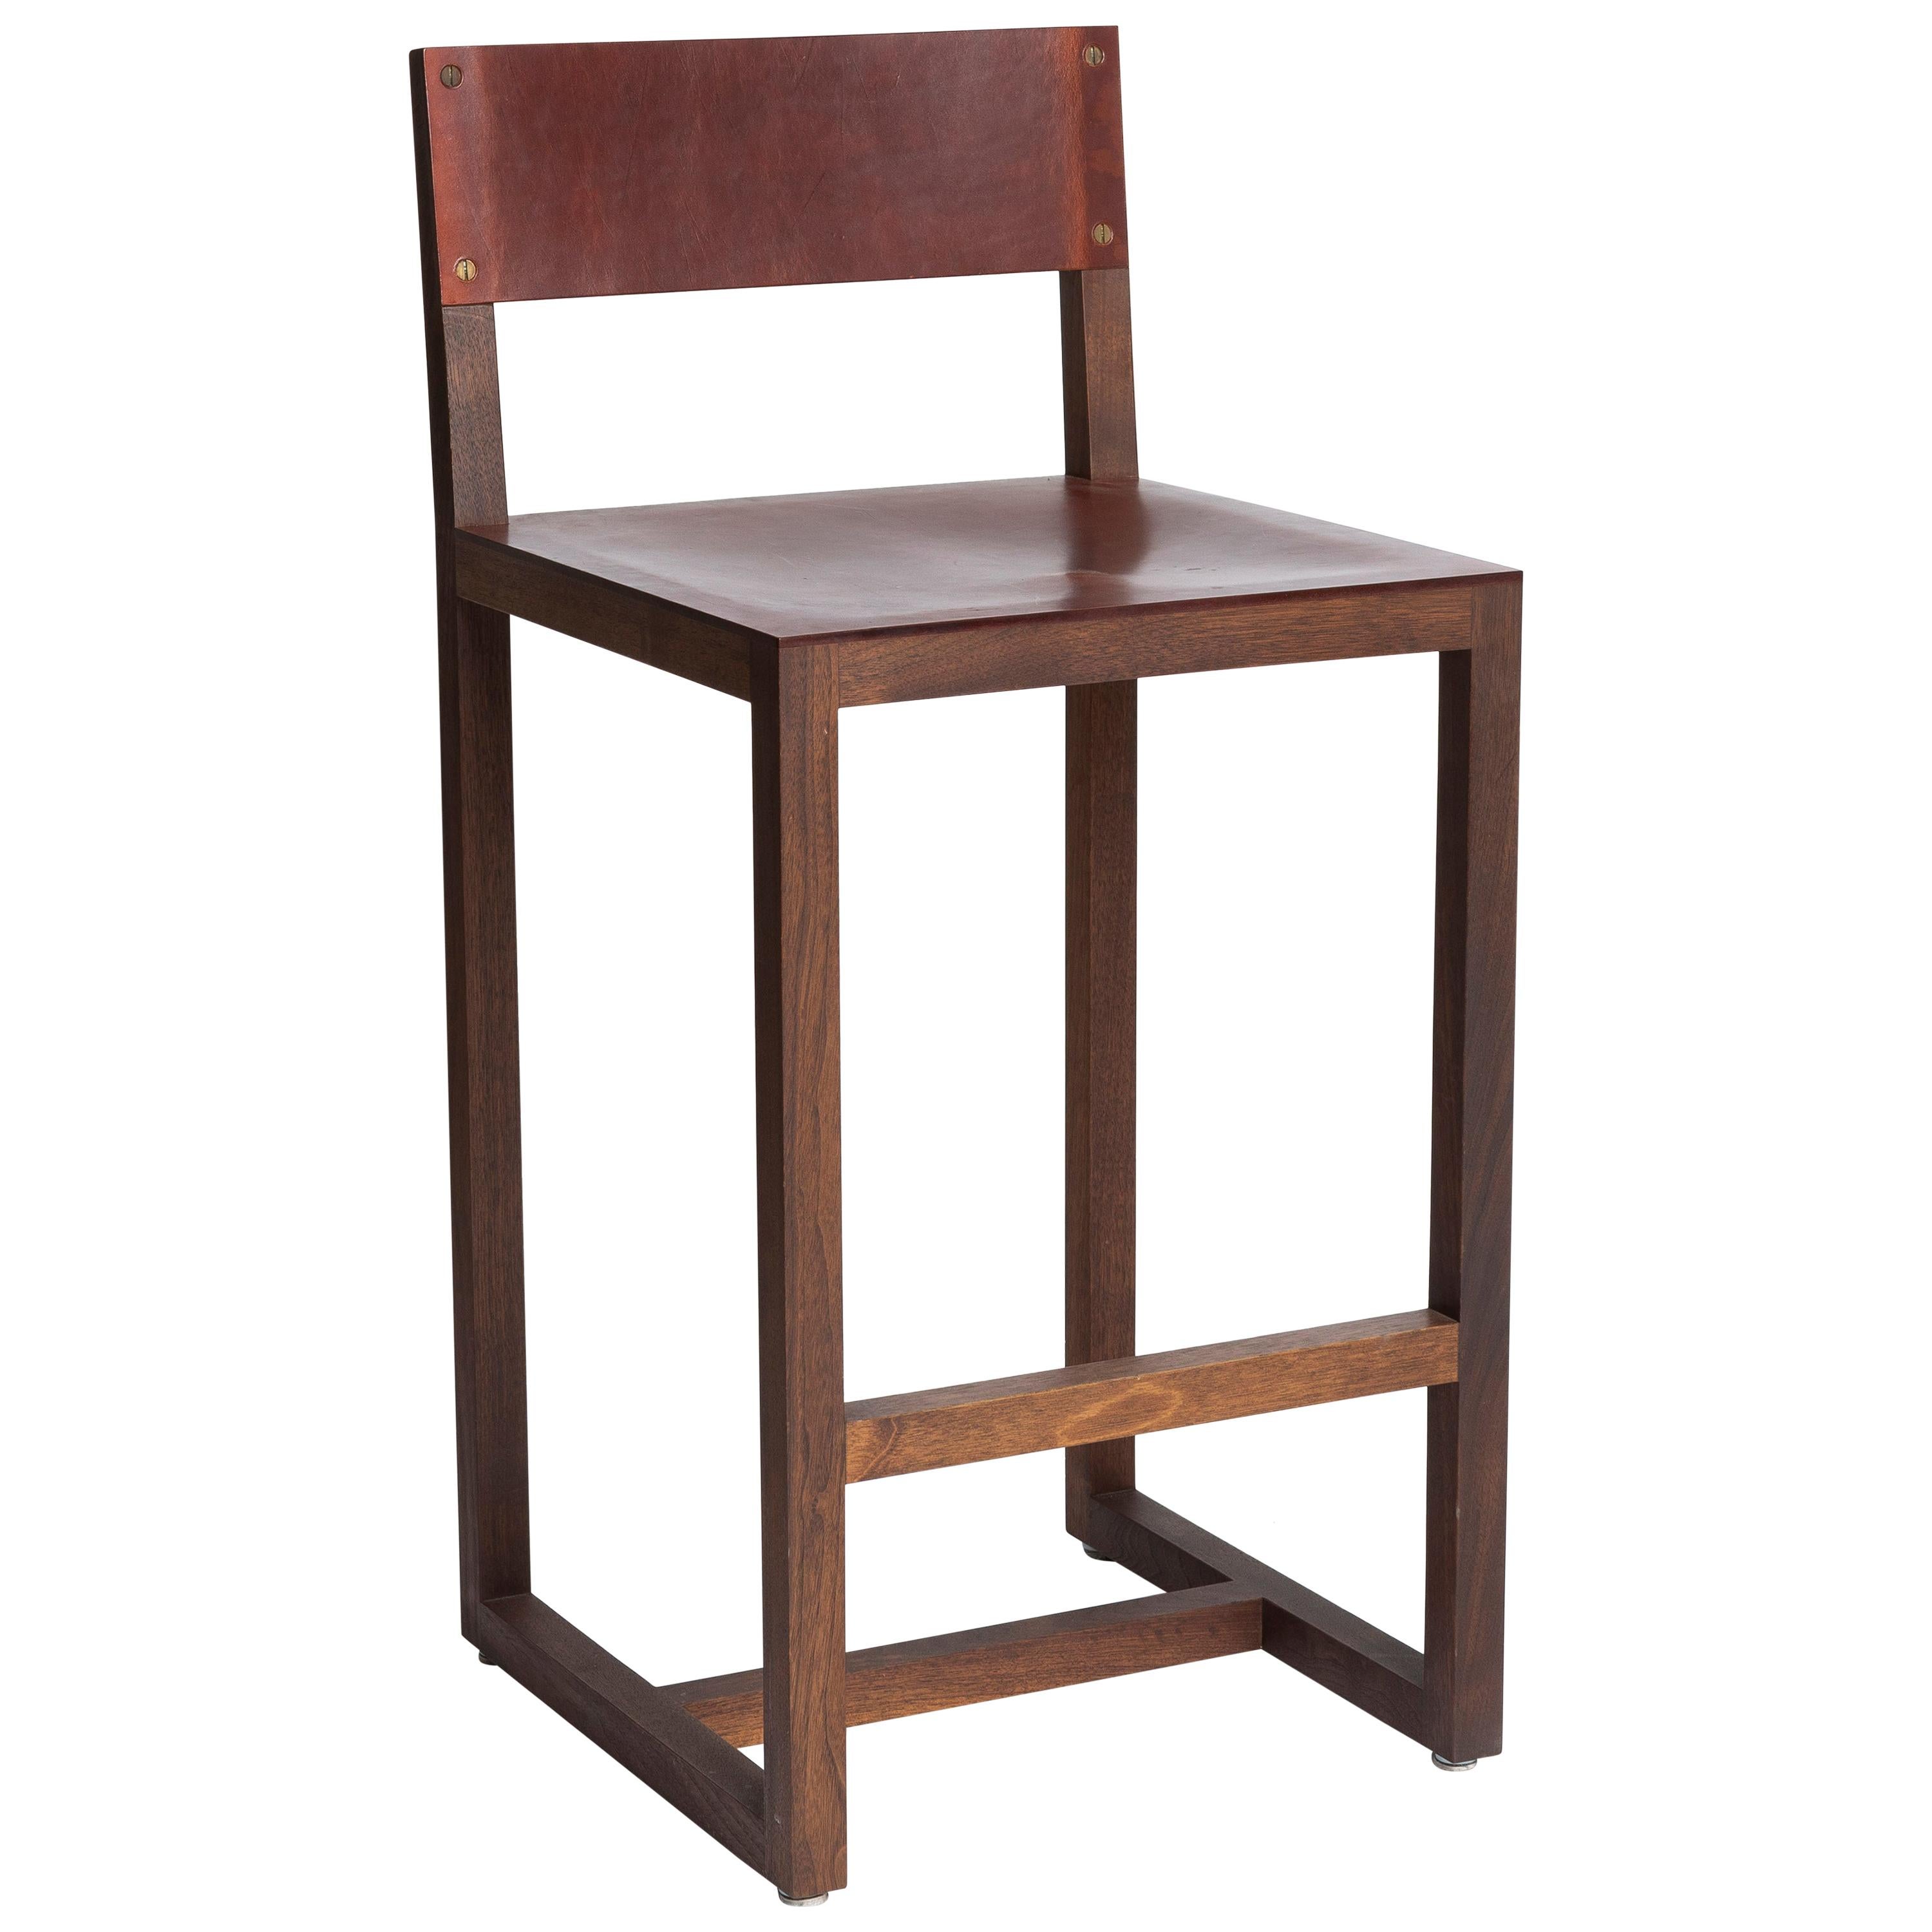 Walnut and Brown Leather Counter Stools by BDDW, Two Available